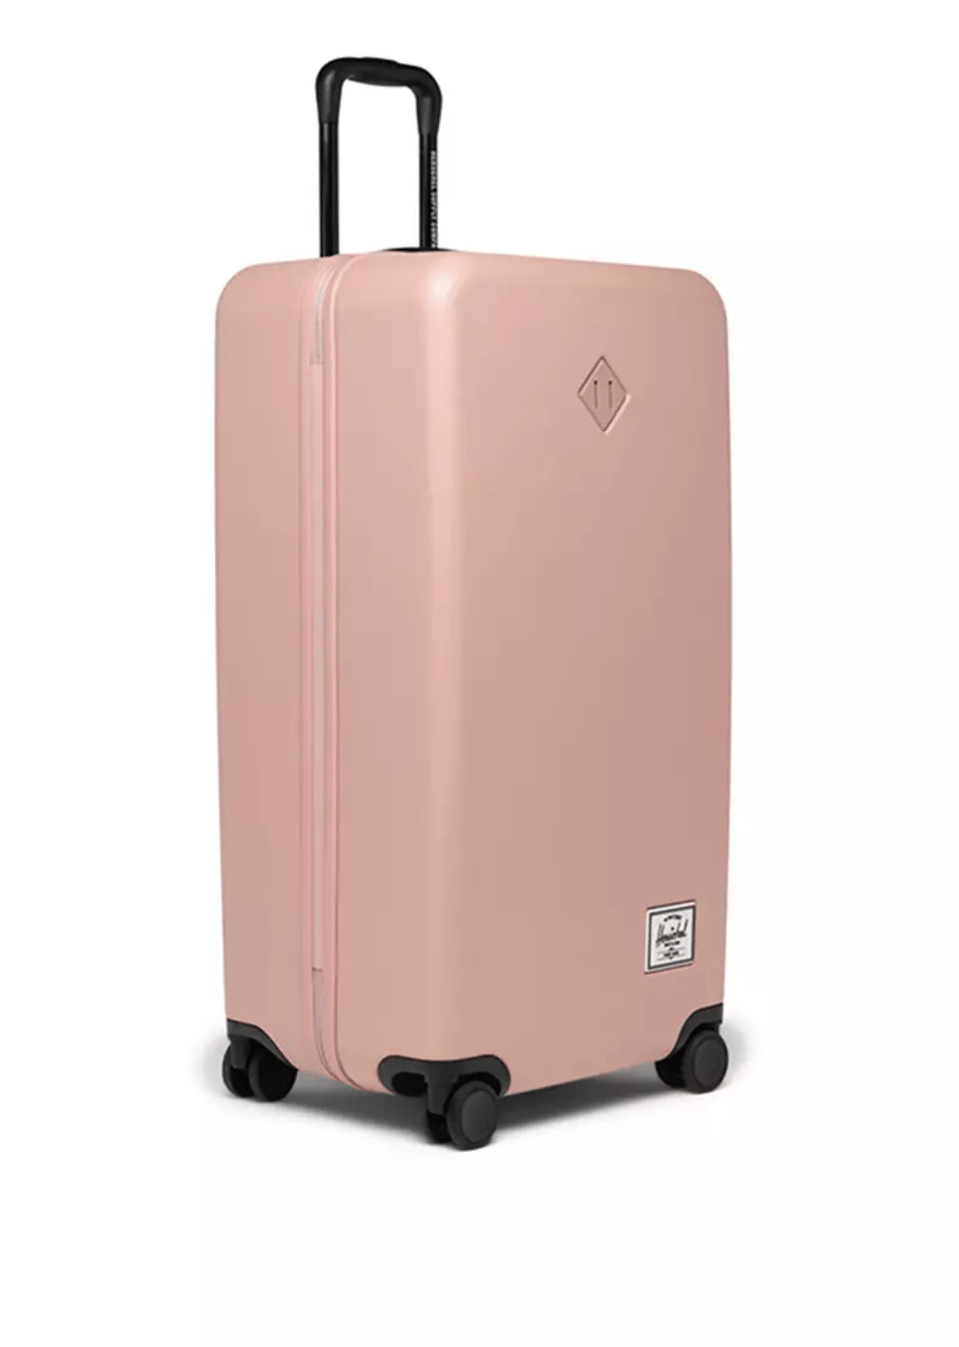 10 Best Luggage Brands in the Philippines for Travelers